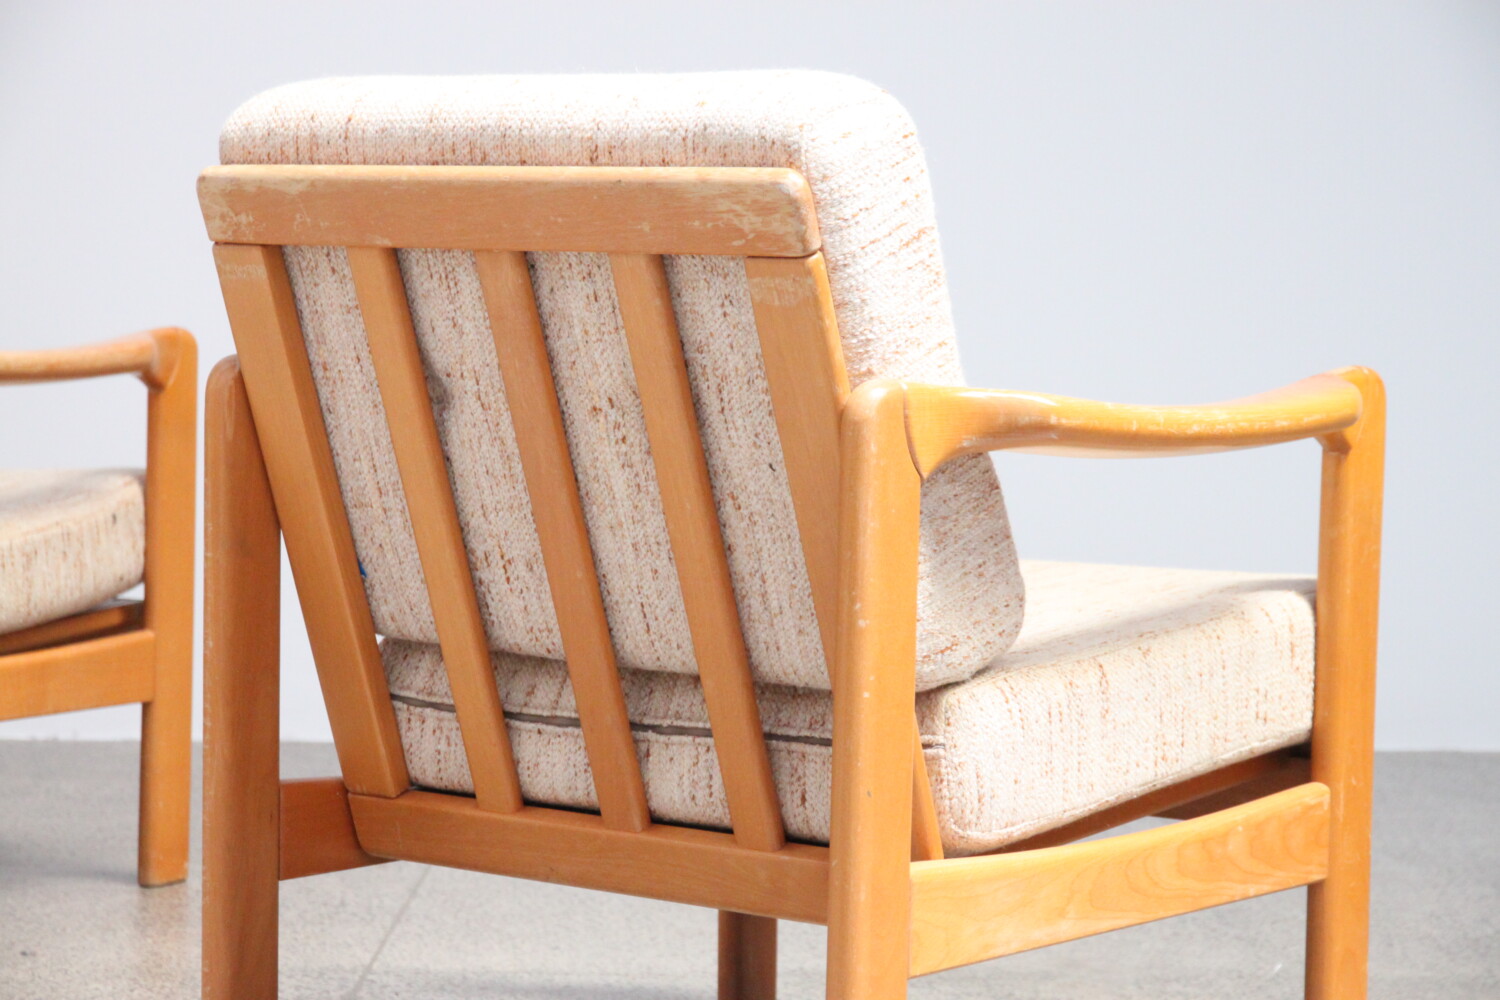 Pair of Beech Armchairs sold (Another pair available)